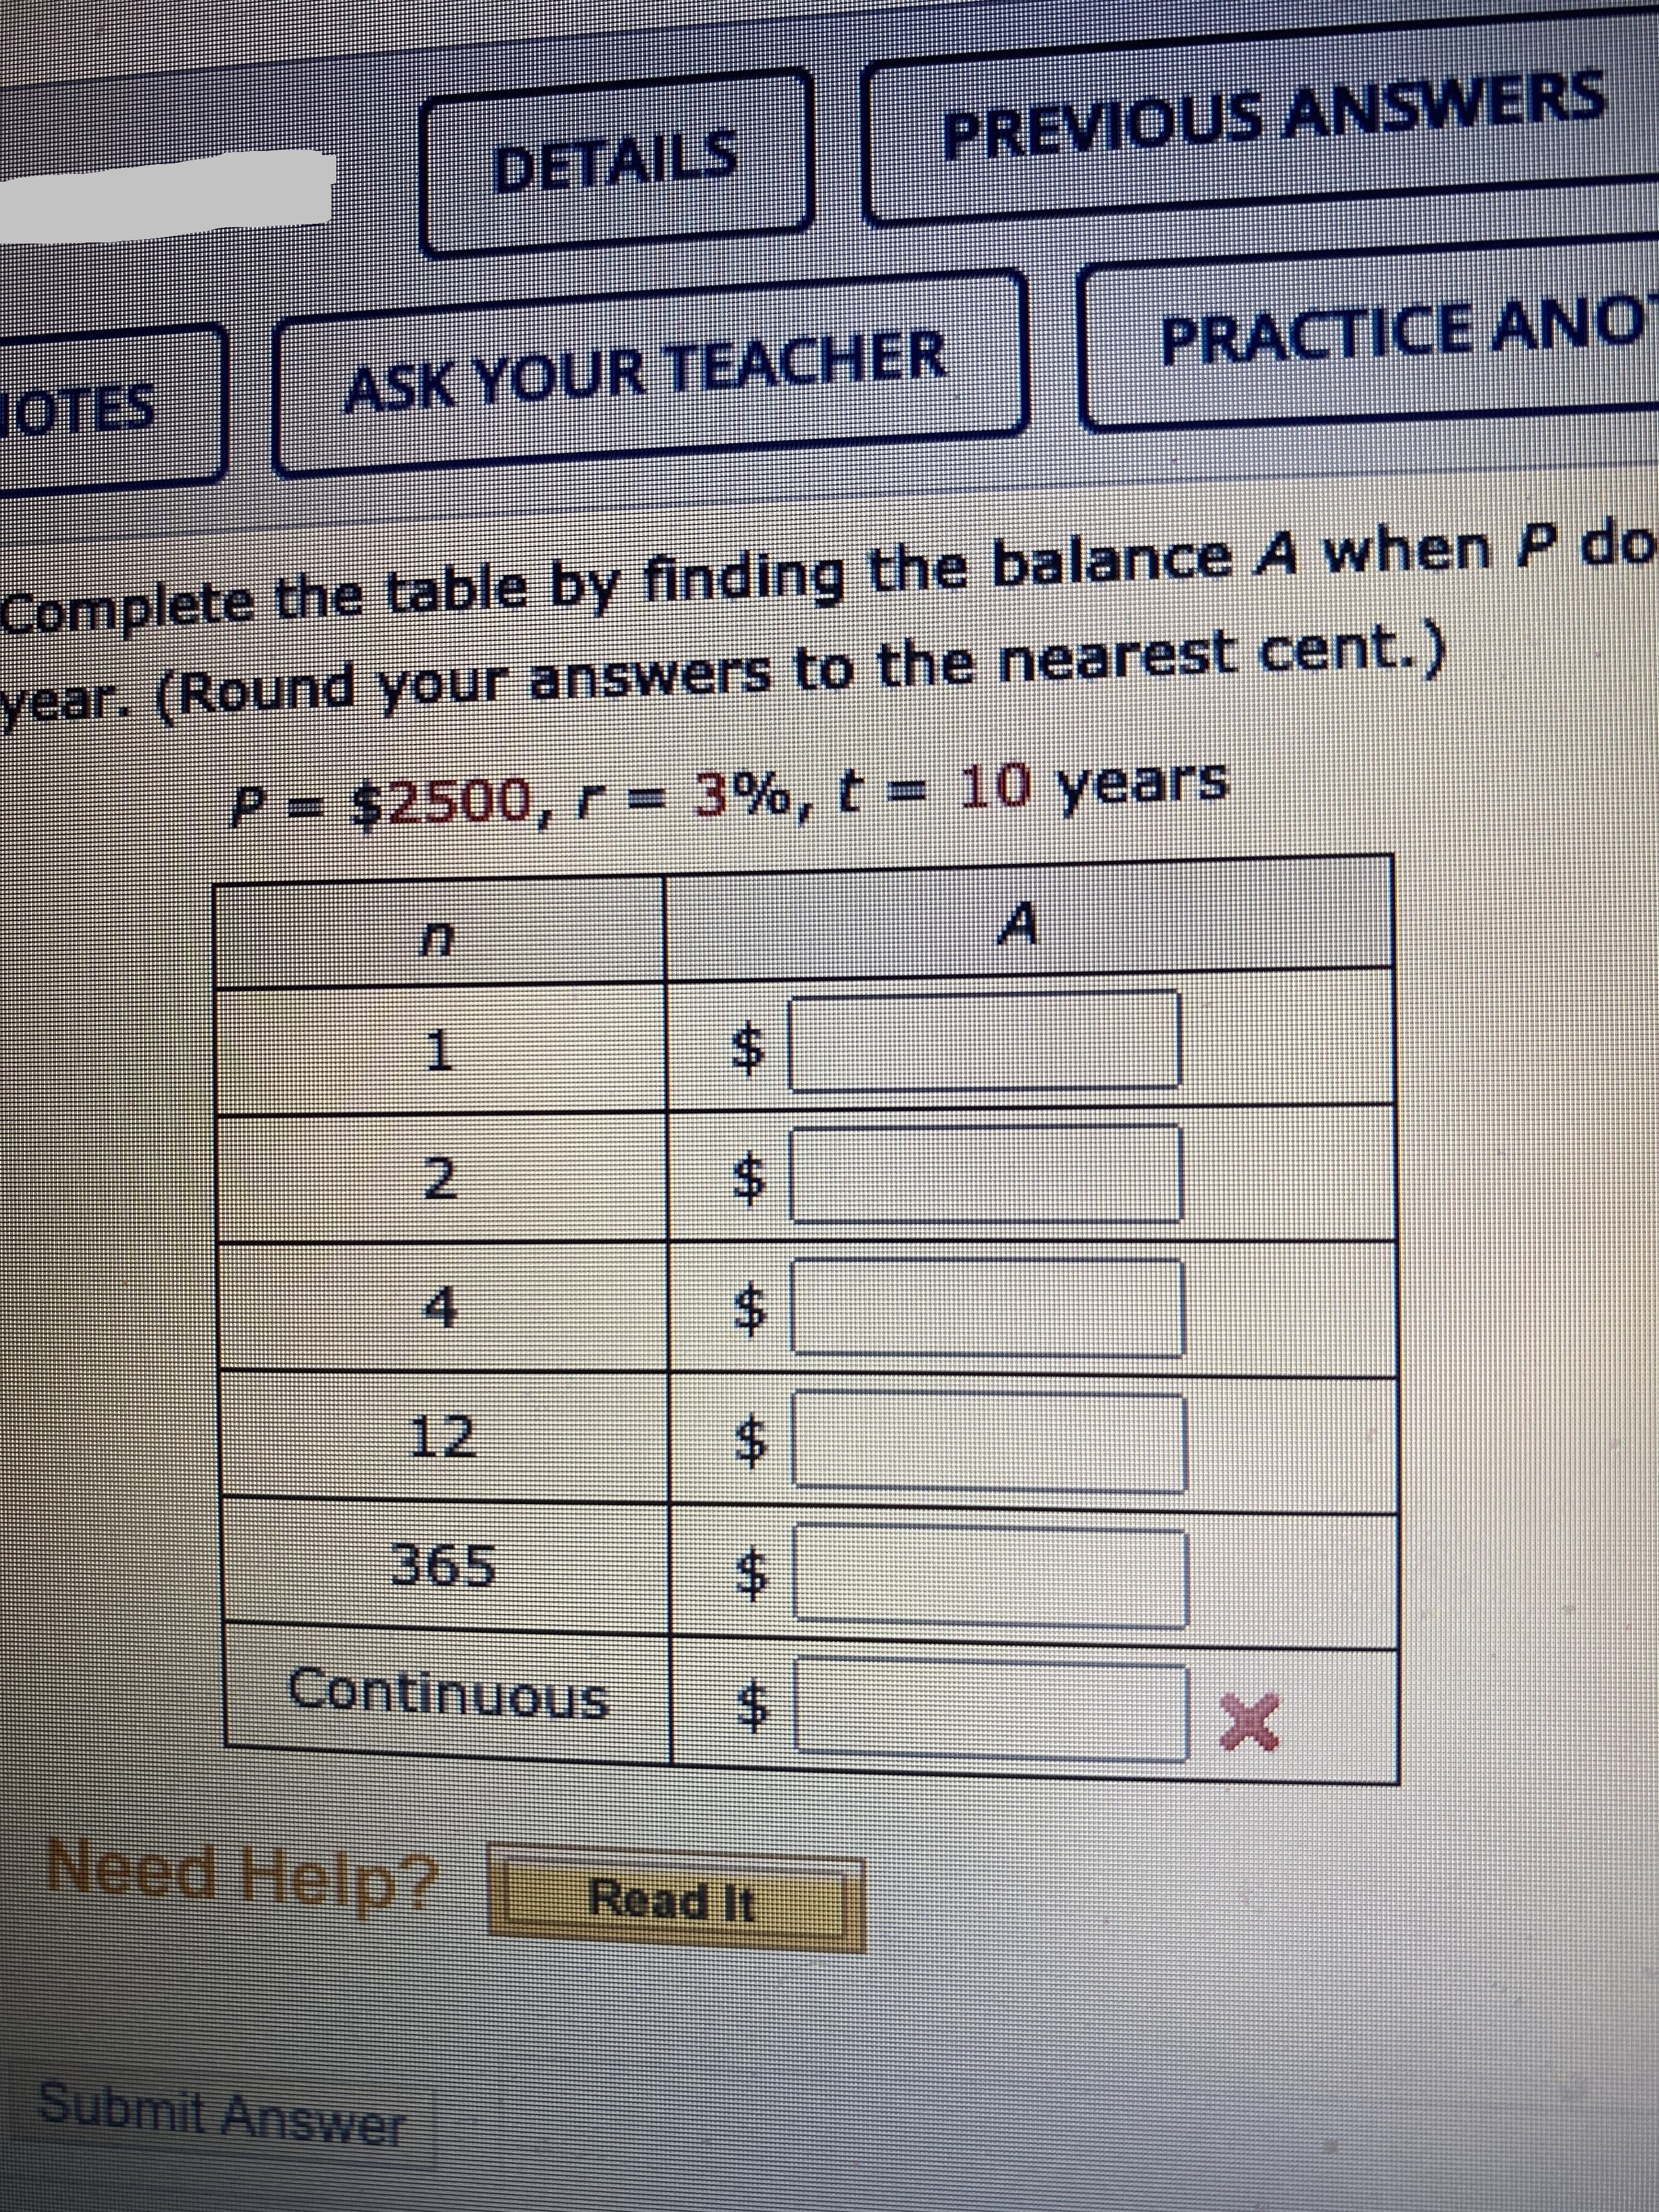 PREVIOUS ANSWERS
DETAILS
PRACTICE ANO
JOTES
ASK YOUR TEACHER
Complete the table by finding the balance A when P do
vear. (Round your answers to the nearest cent.
P= $2500, r =
3%, t = 10 years
Al
1.
$4
12
365
Continuous
Need Help?
Read It
Submit Answer
%24
%24
%24
%24
%24
%24
2.
